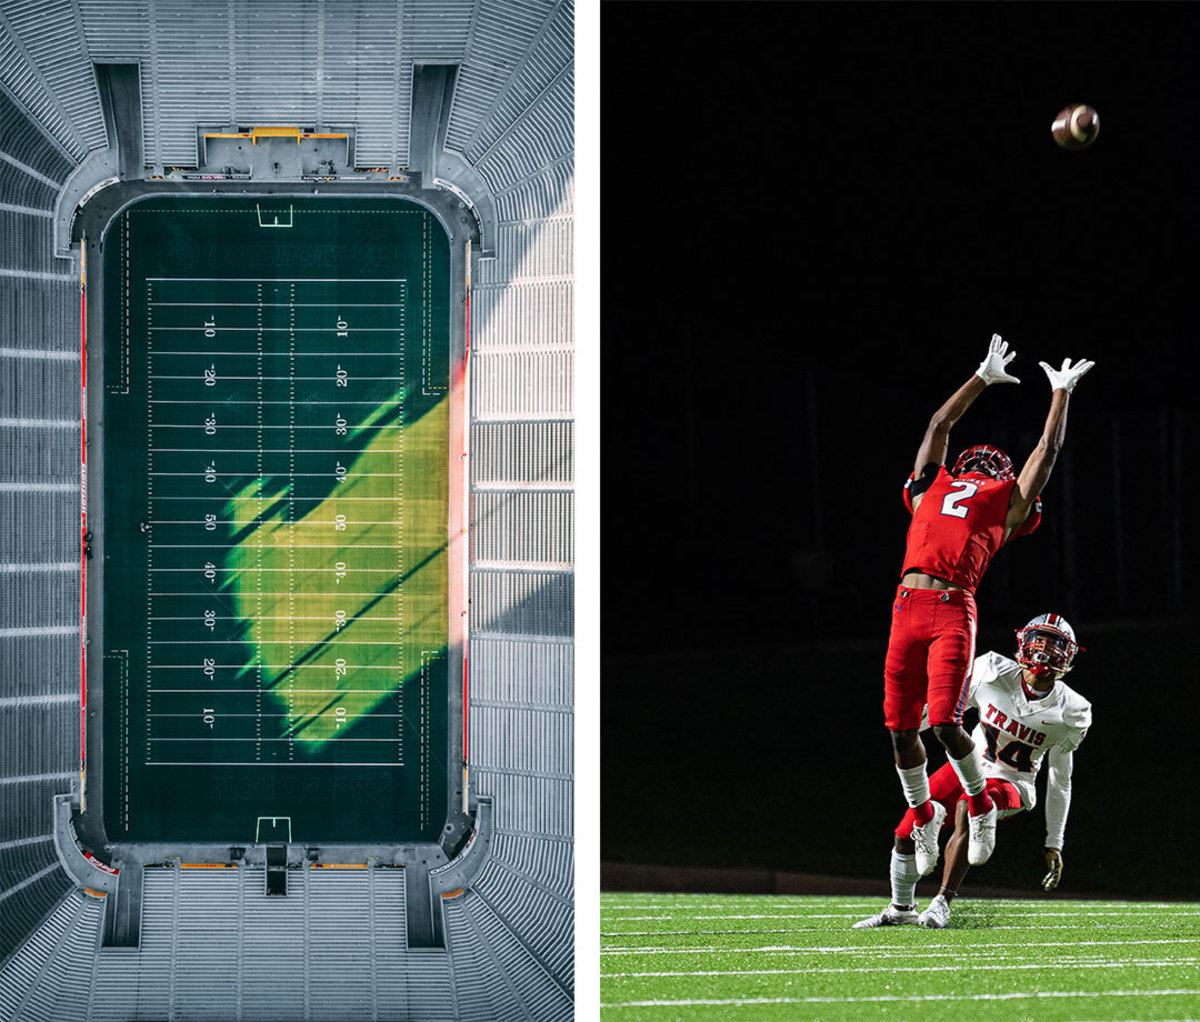 Composite image of stadium and college football player catching ball in the air